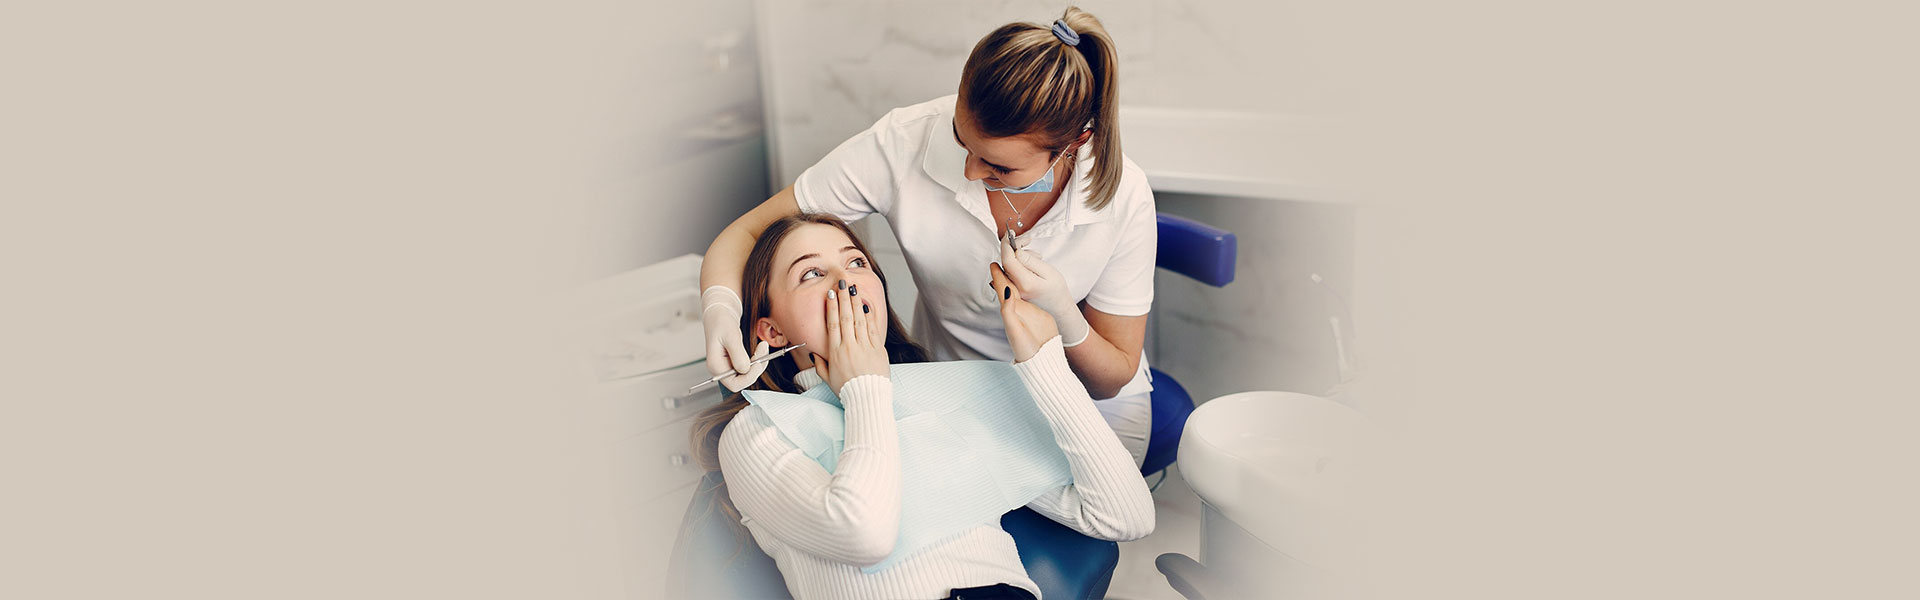 Emergency Dental Visits: Creating a Comforting Experience for Kids